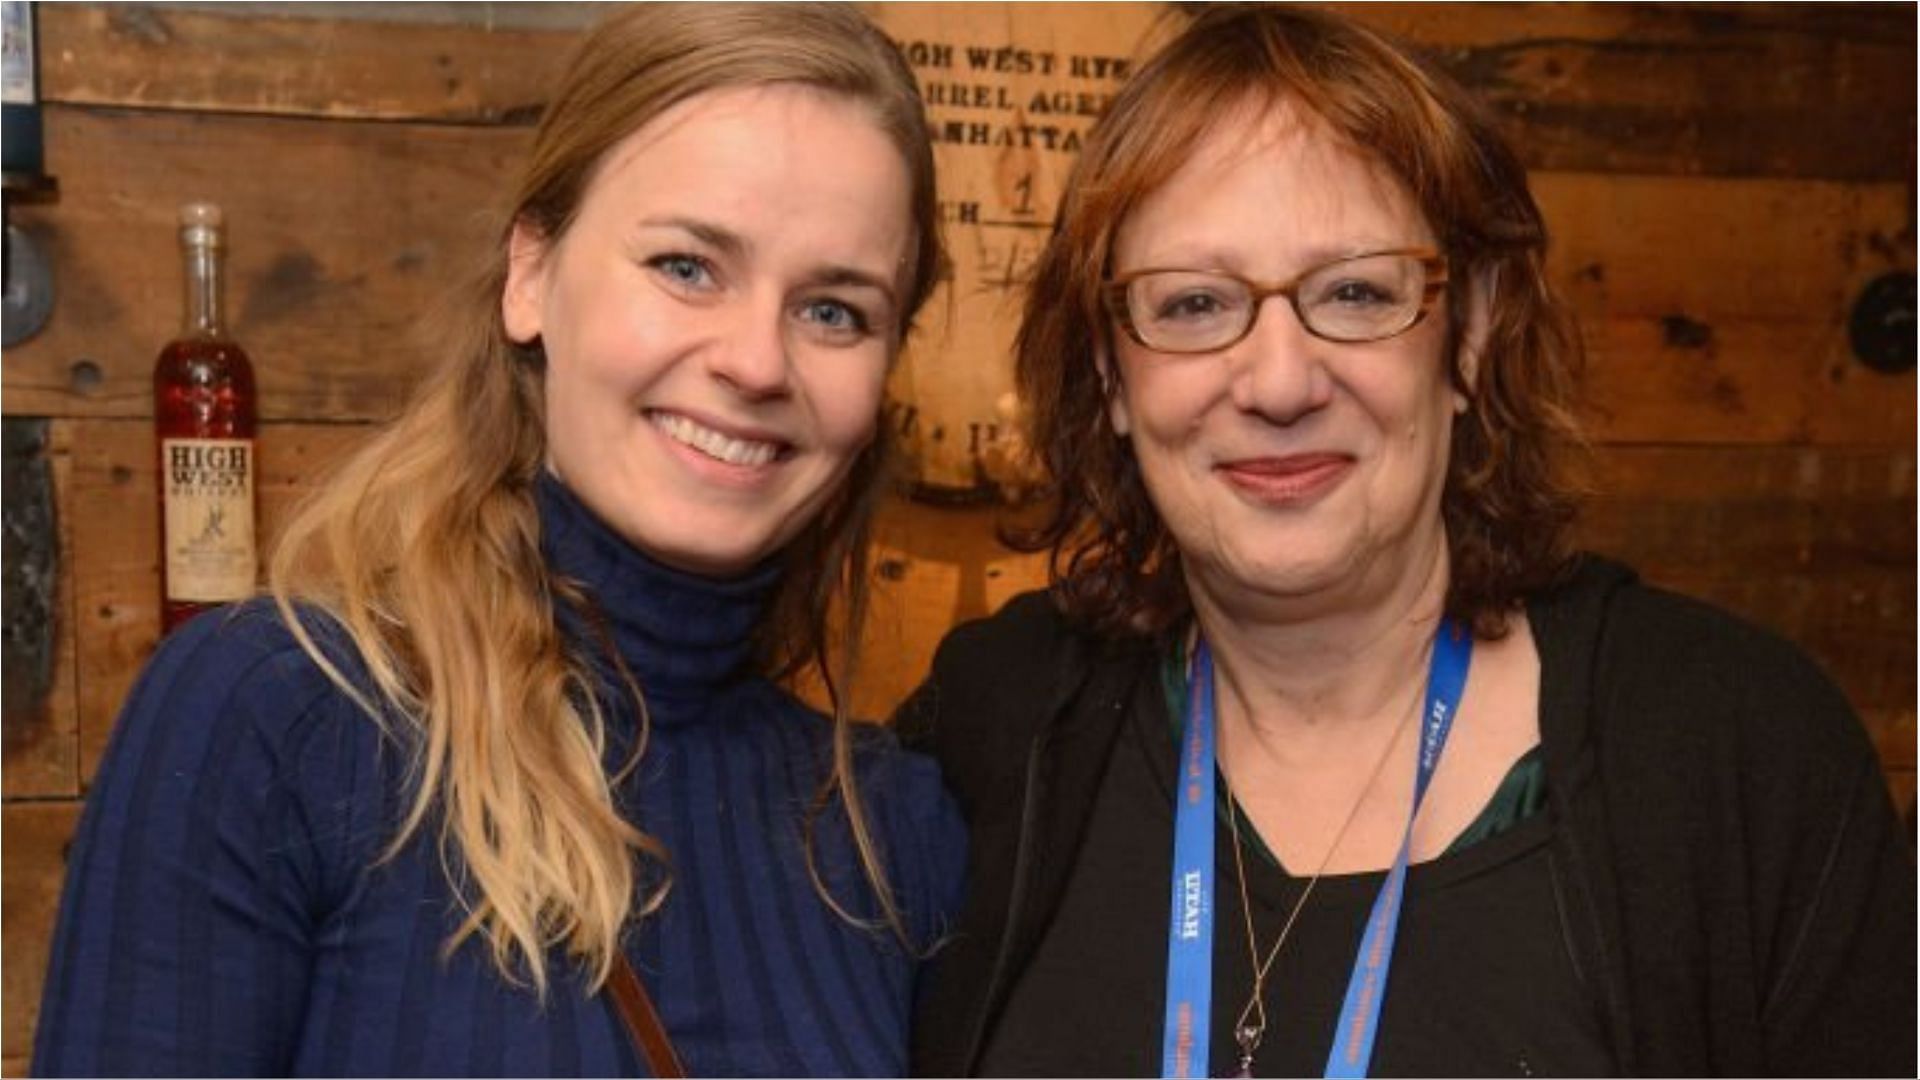 Mette-Marie Kongsved and Janet Pierson attend Brunch with the Brits during the 2018 Sundance Film Festival (Image via Daniel Boczarski/Getty Images)